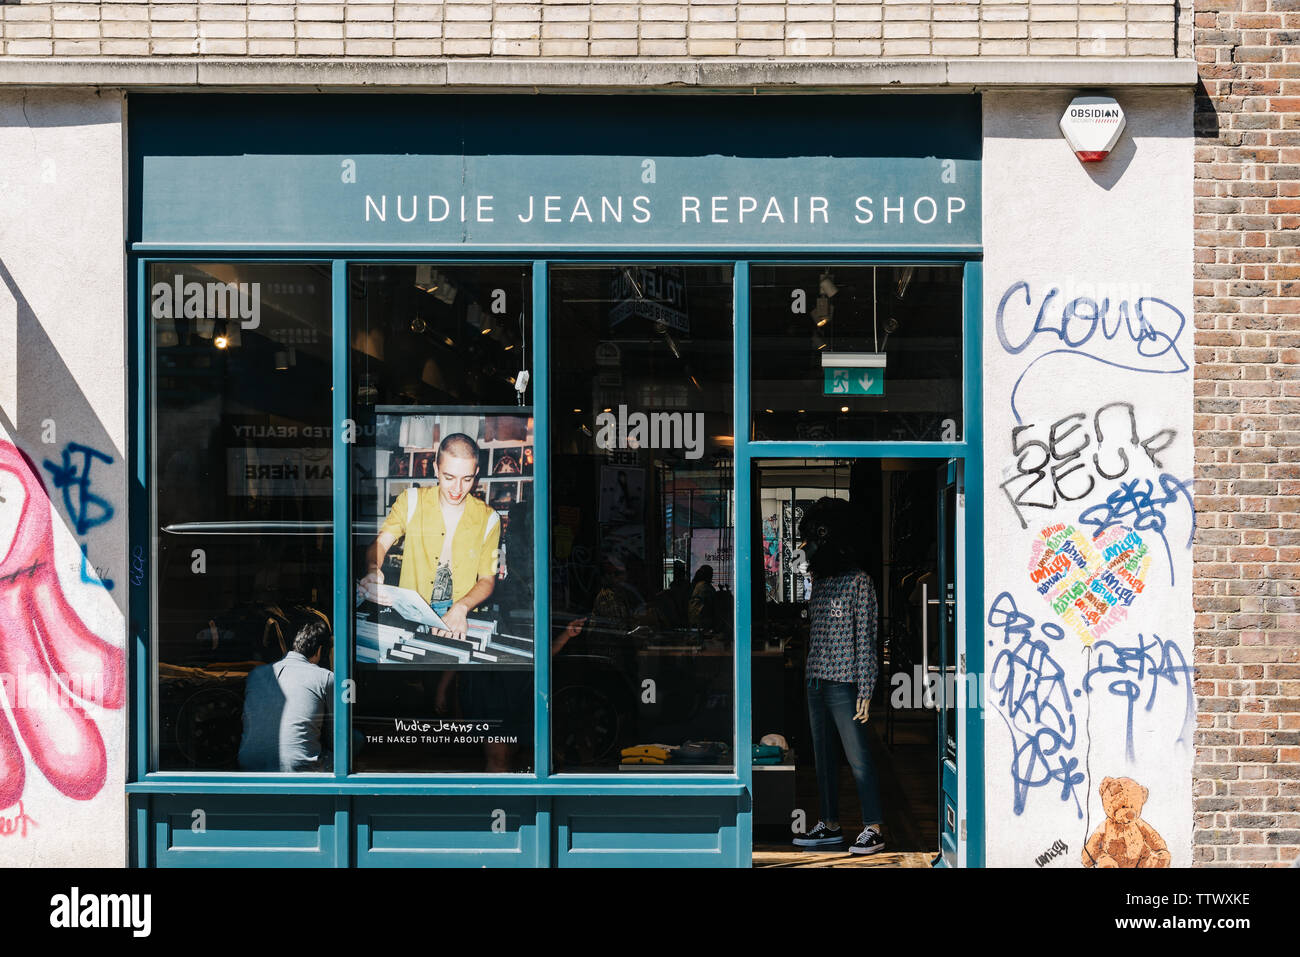 Nudie Jeans Repair Shop High Resolution Stock Photography and Images - Alamy